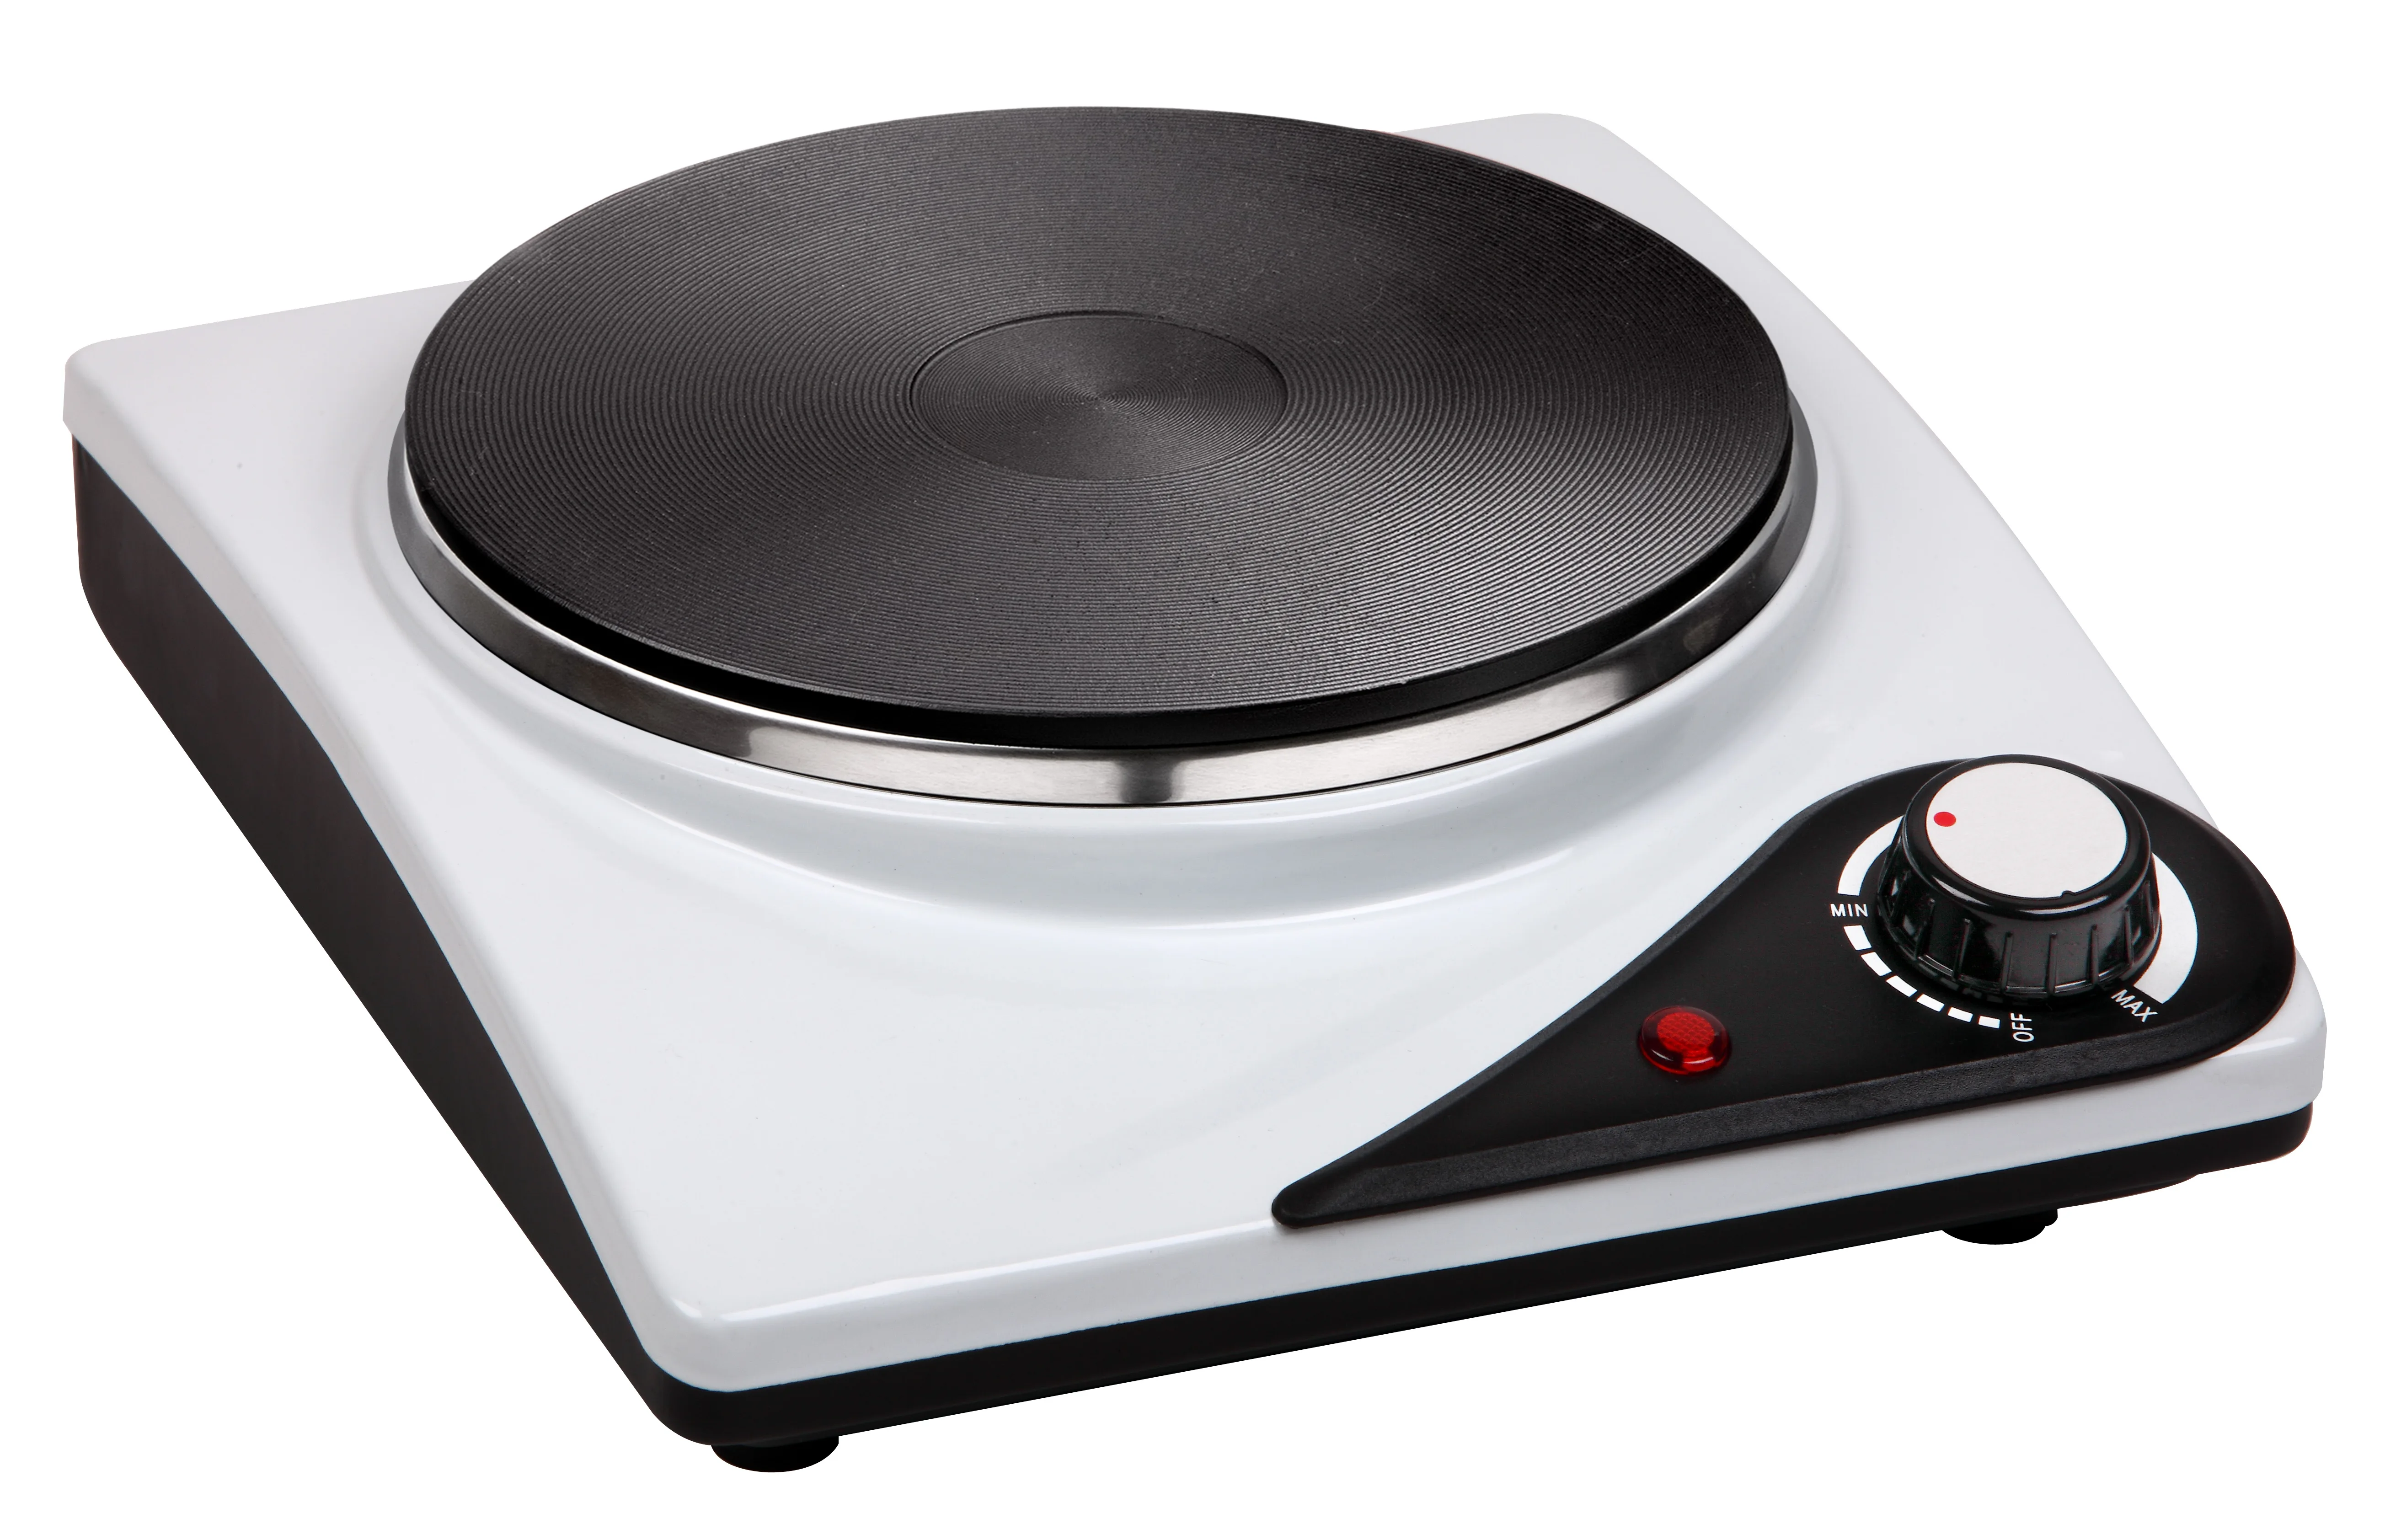 Portable Coffee Burner Griddle Kitchen Stainless Steel Stove Cooker Cooking Electric Hot Plate